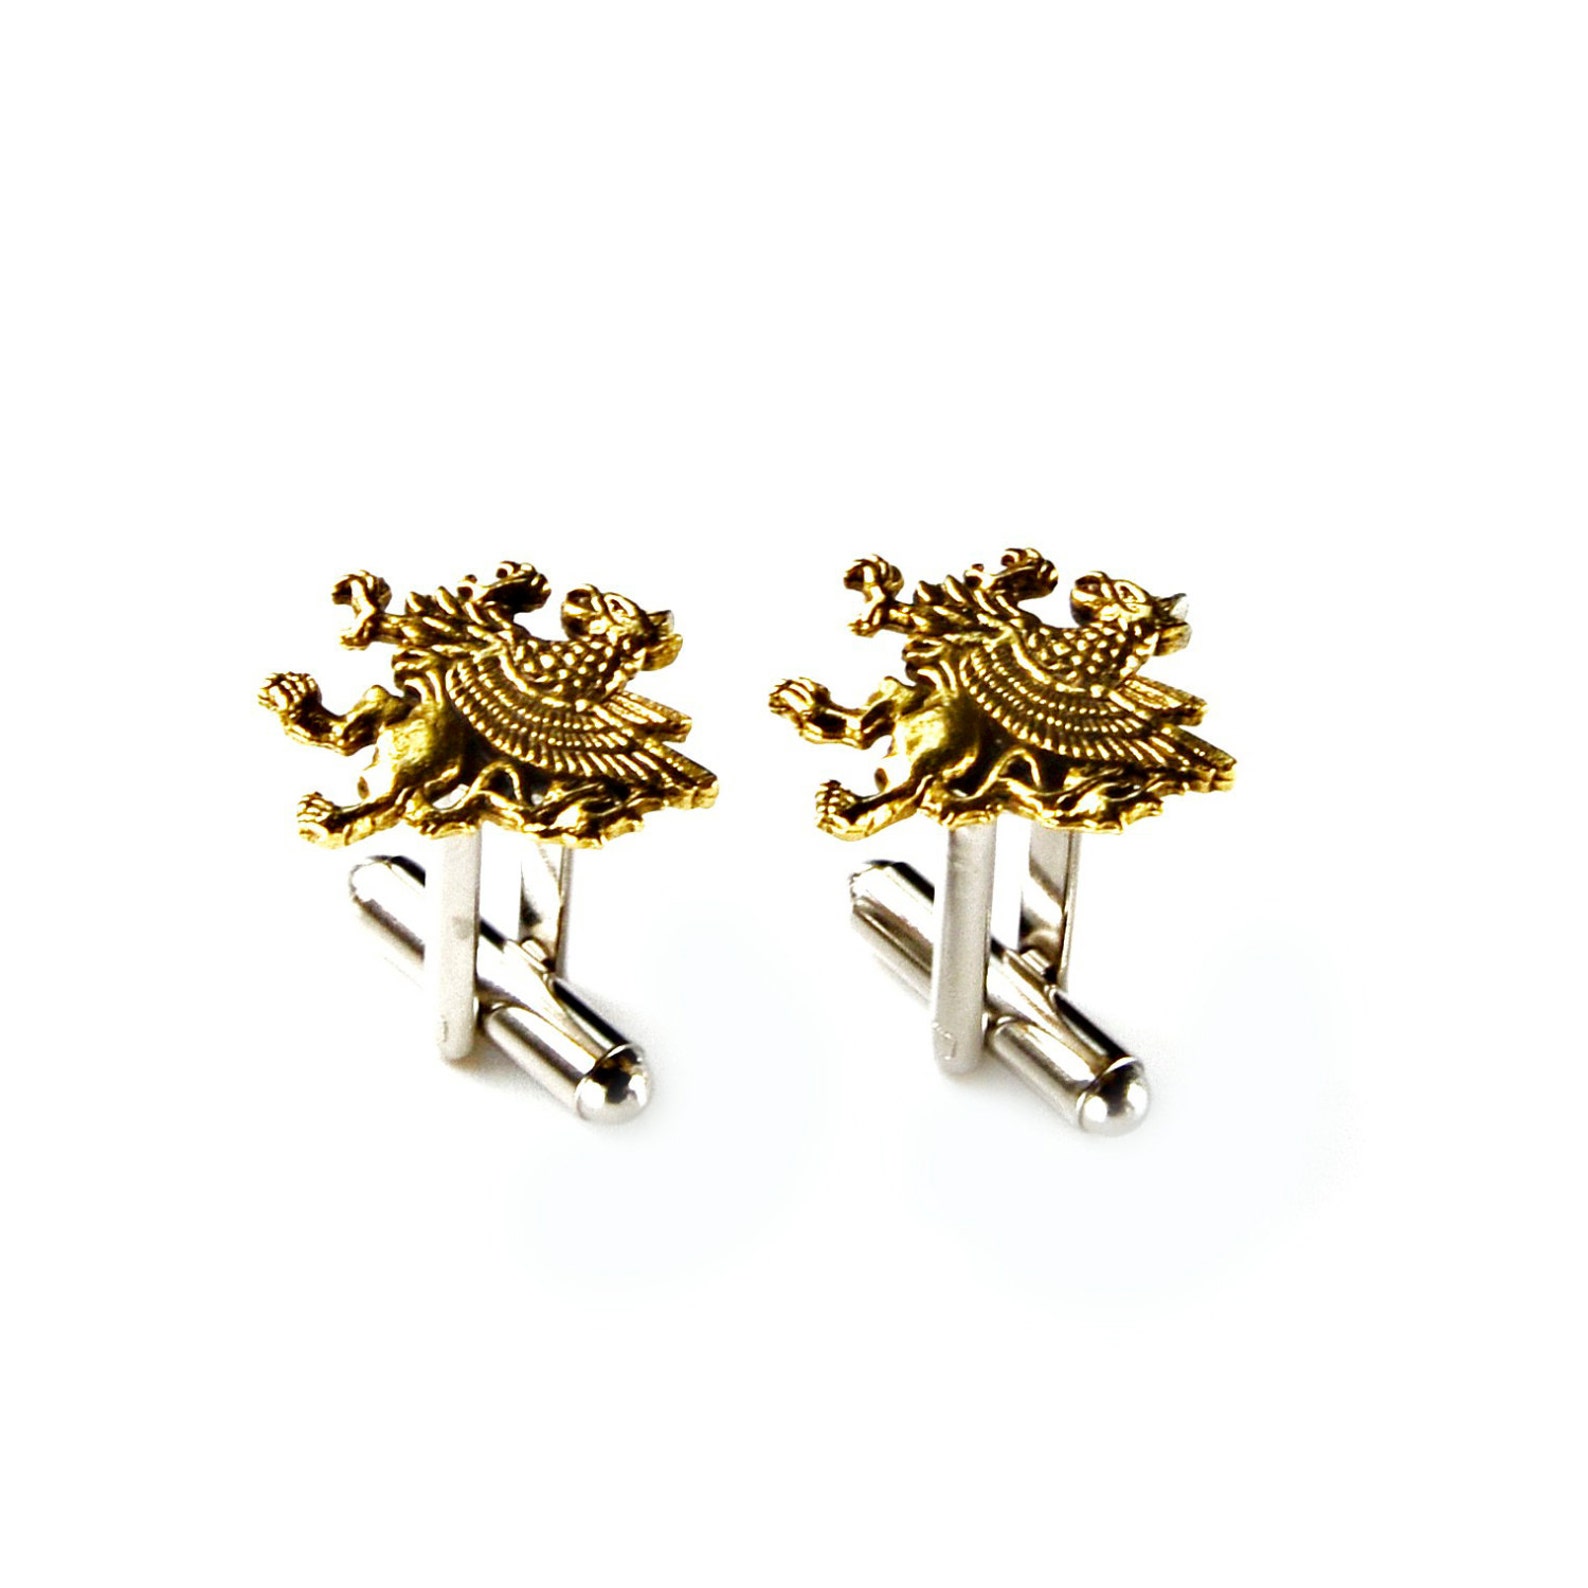 Griffin Cufflinks Express Yourself - Etsy